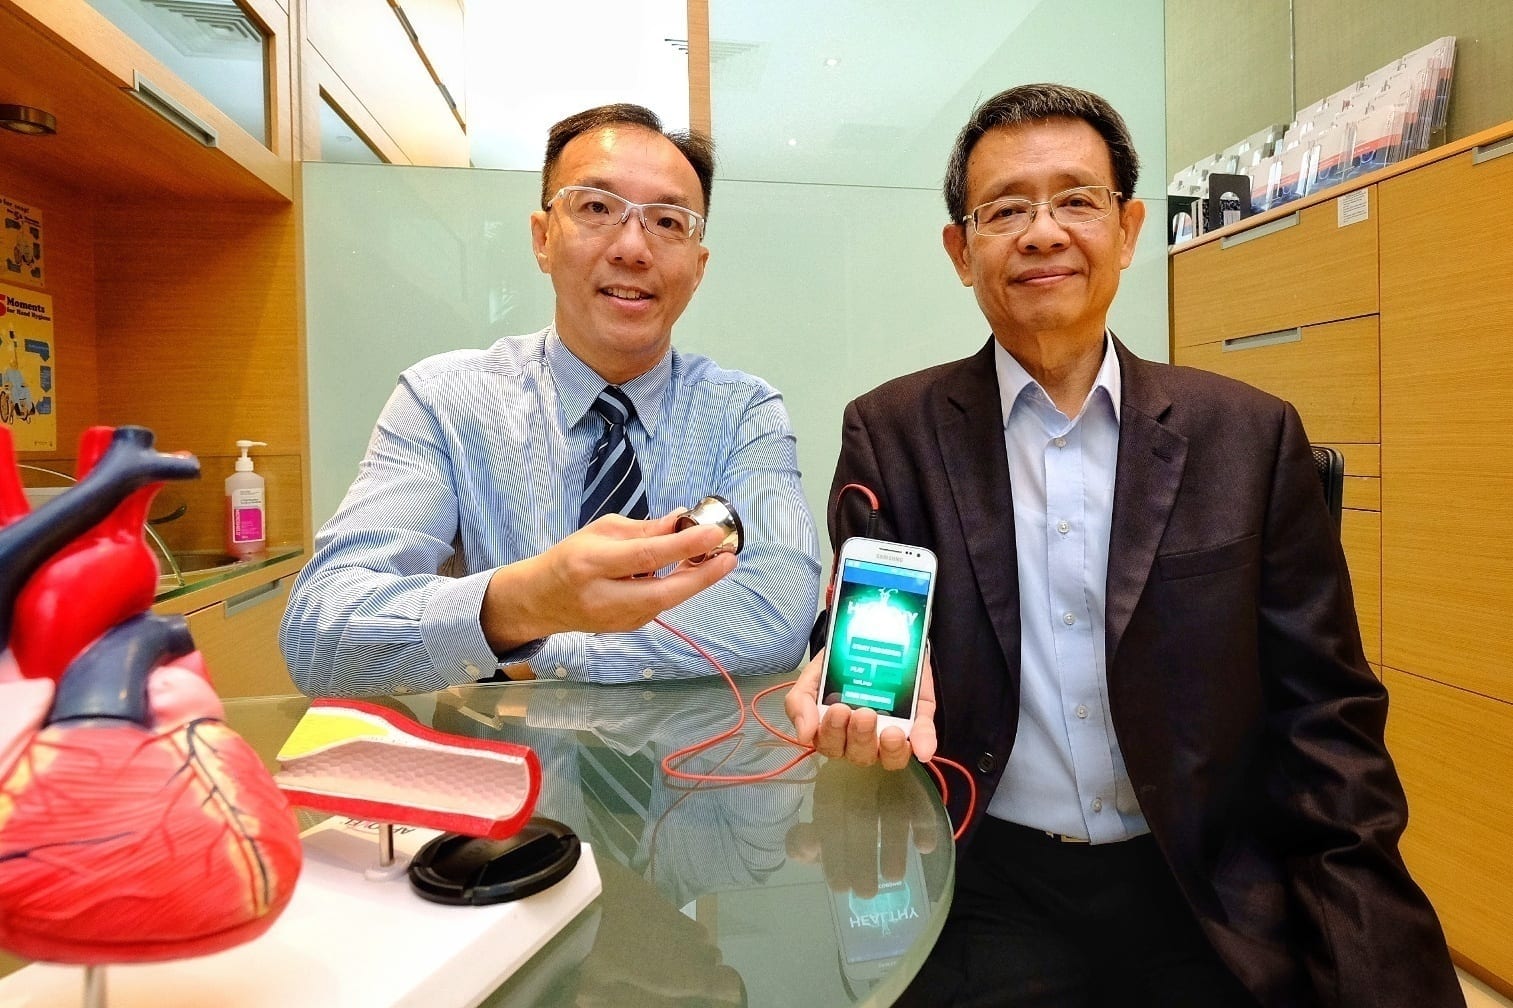 A smart handheld diagnostic device could allow early intervention for people with congestive heart failure